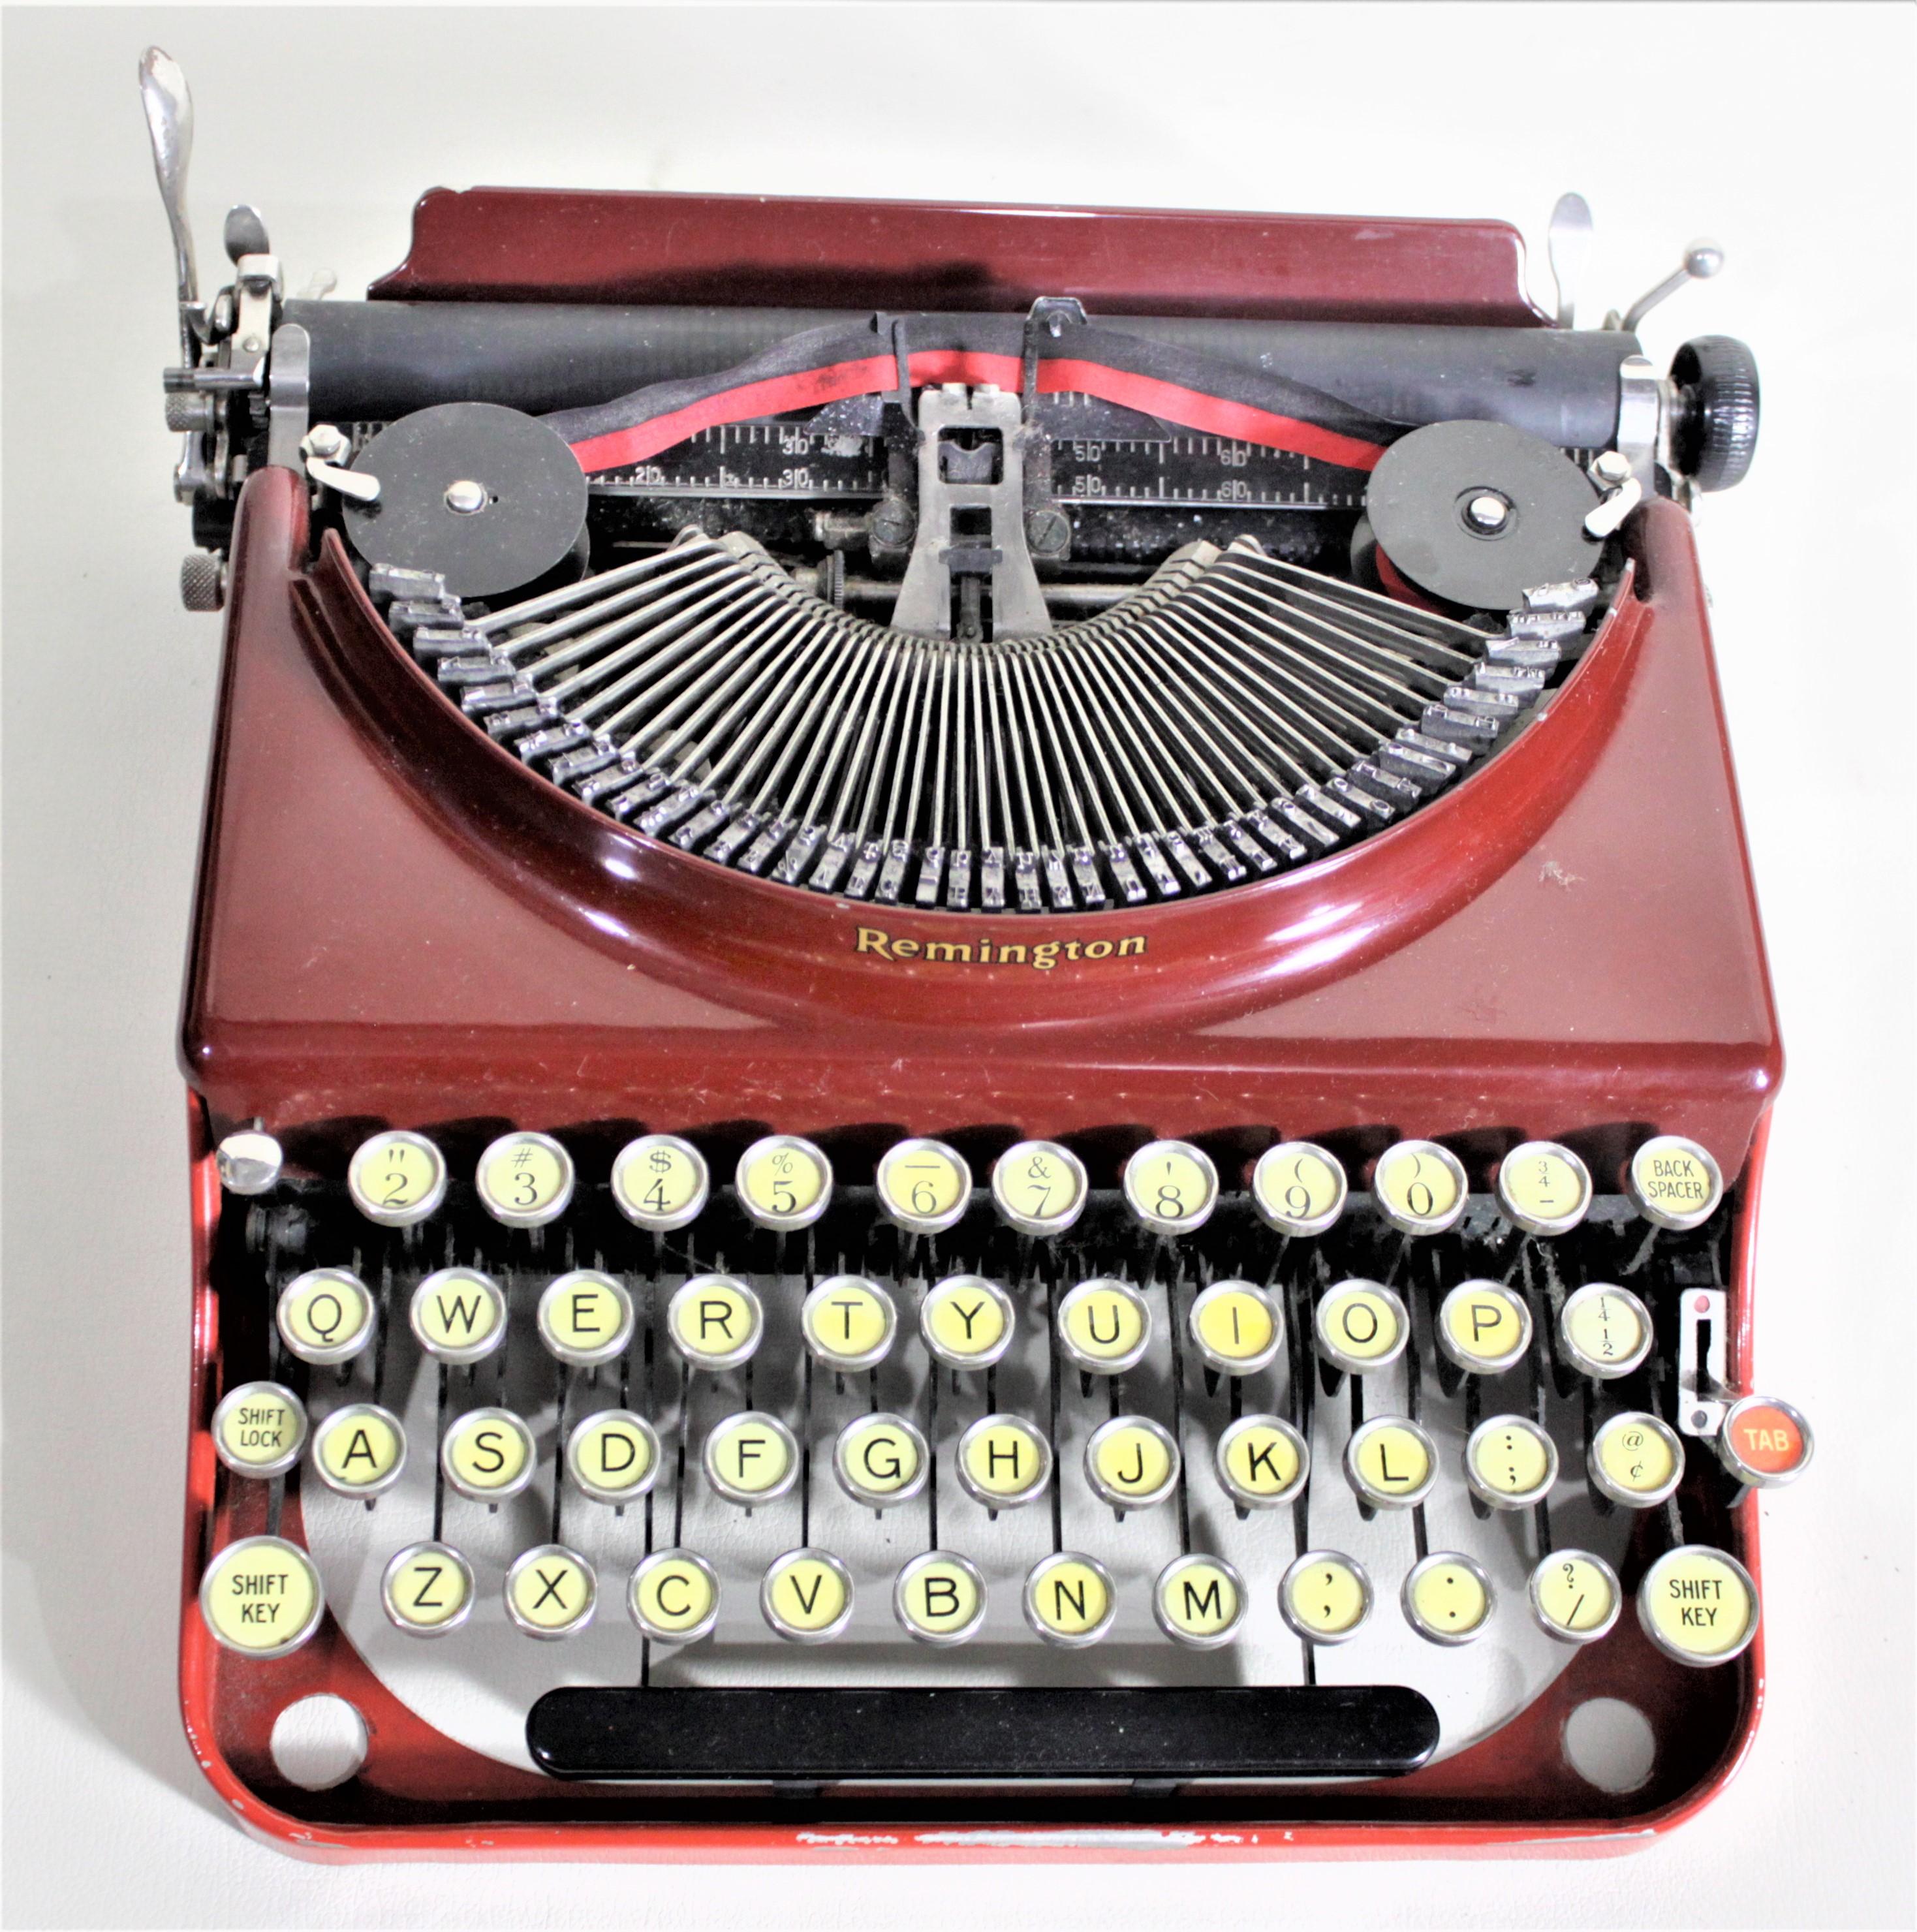 This red Art Deco streamlined portable typewriter was made by Remington Rand of the United States in circa 1935. This typewriter is done with a two-tone finish having a bright red base and a burgundy top with gold lettering across the front and on